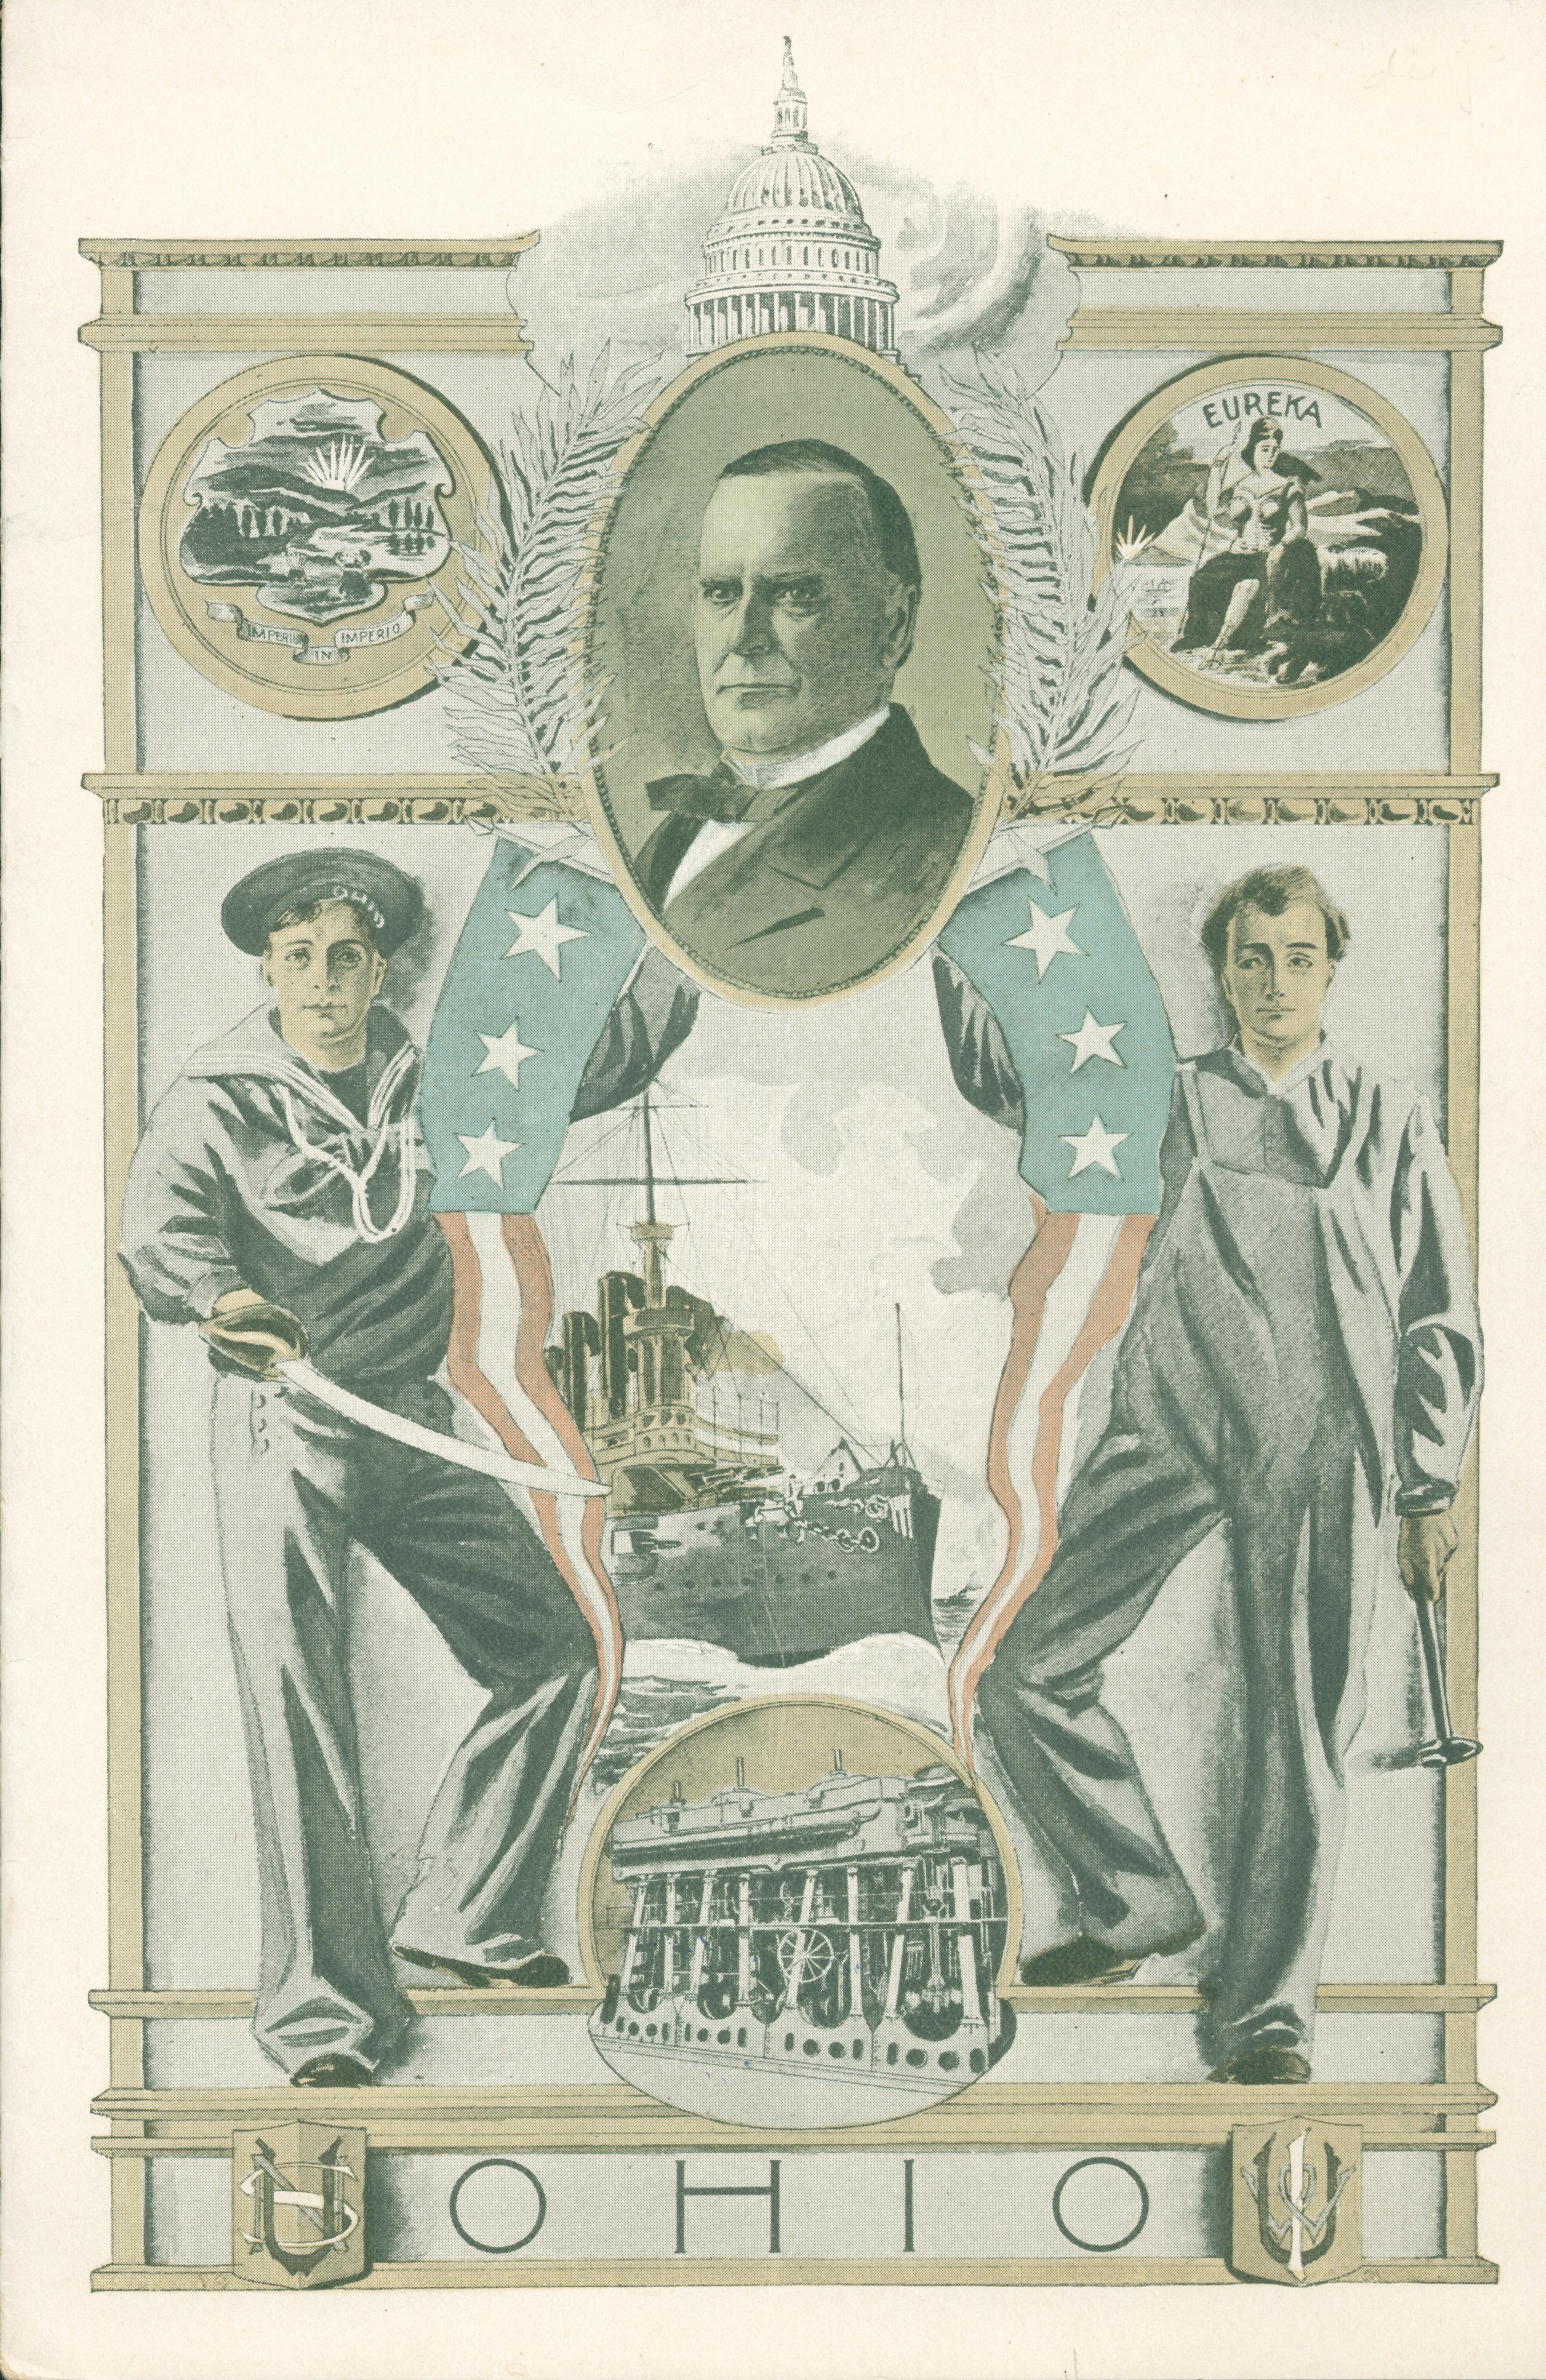 Front shows the ship framed by three individuals, a sailor, a man in a suit and a shipbuilder